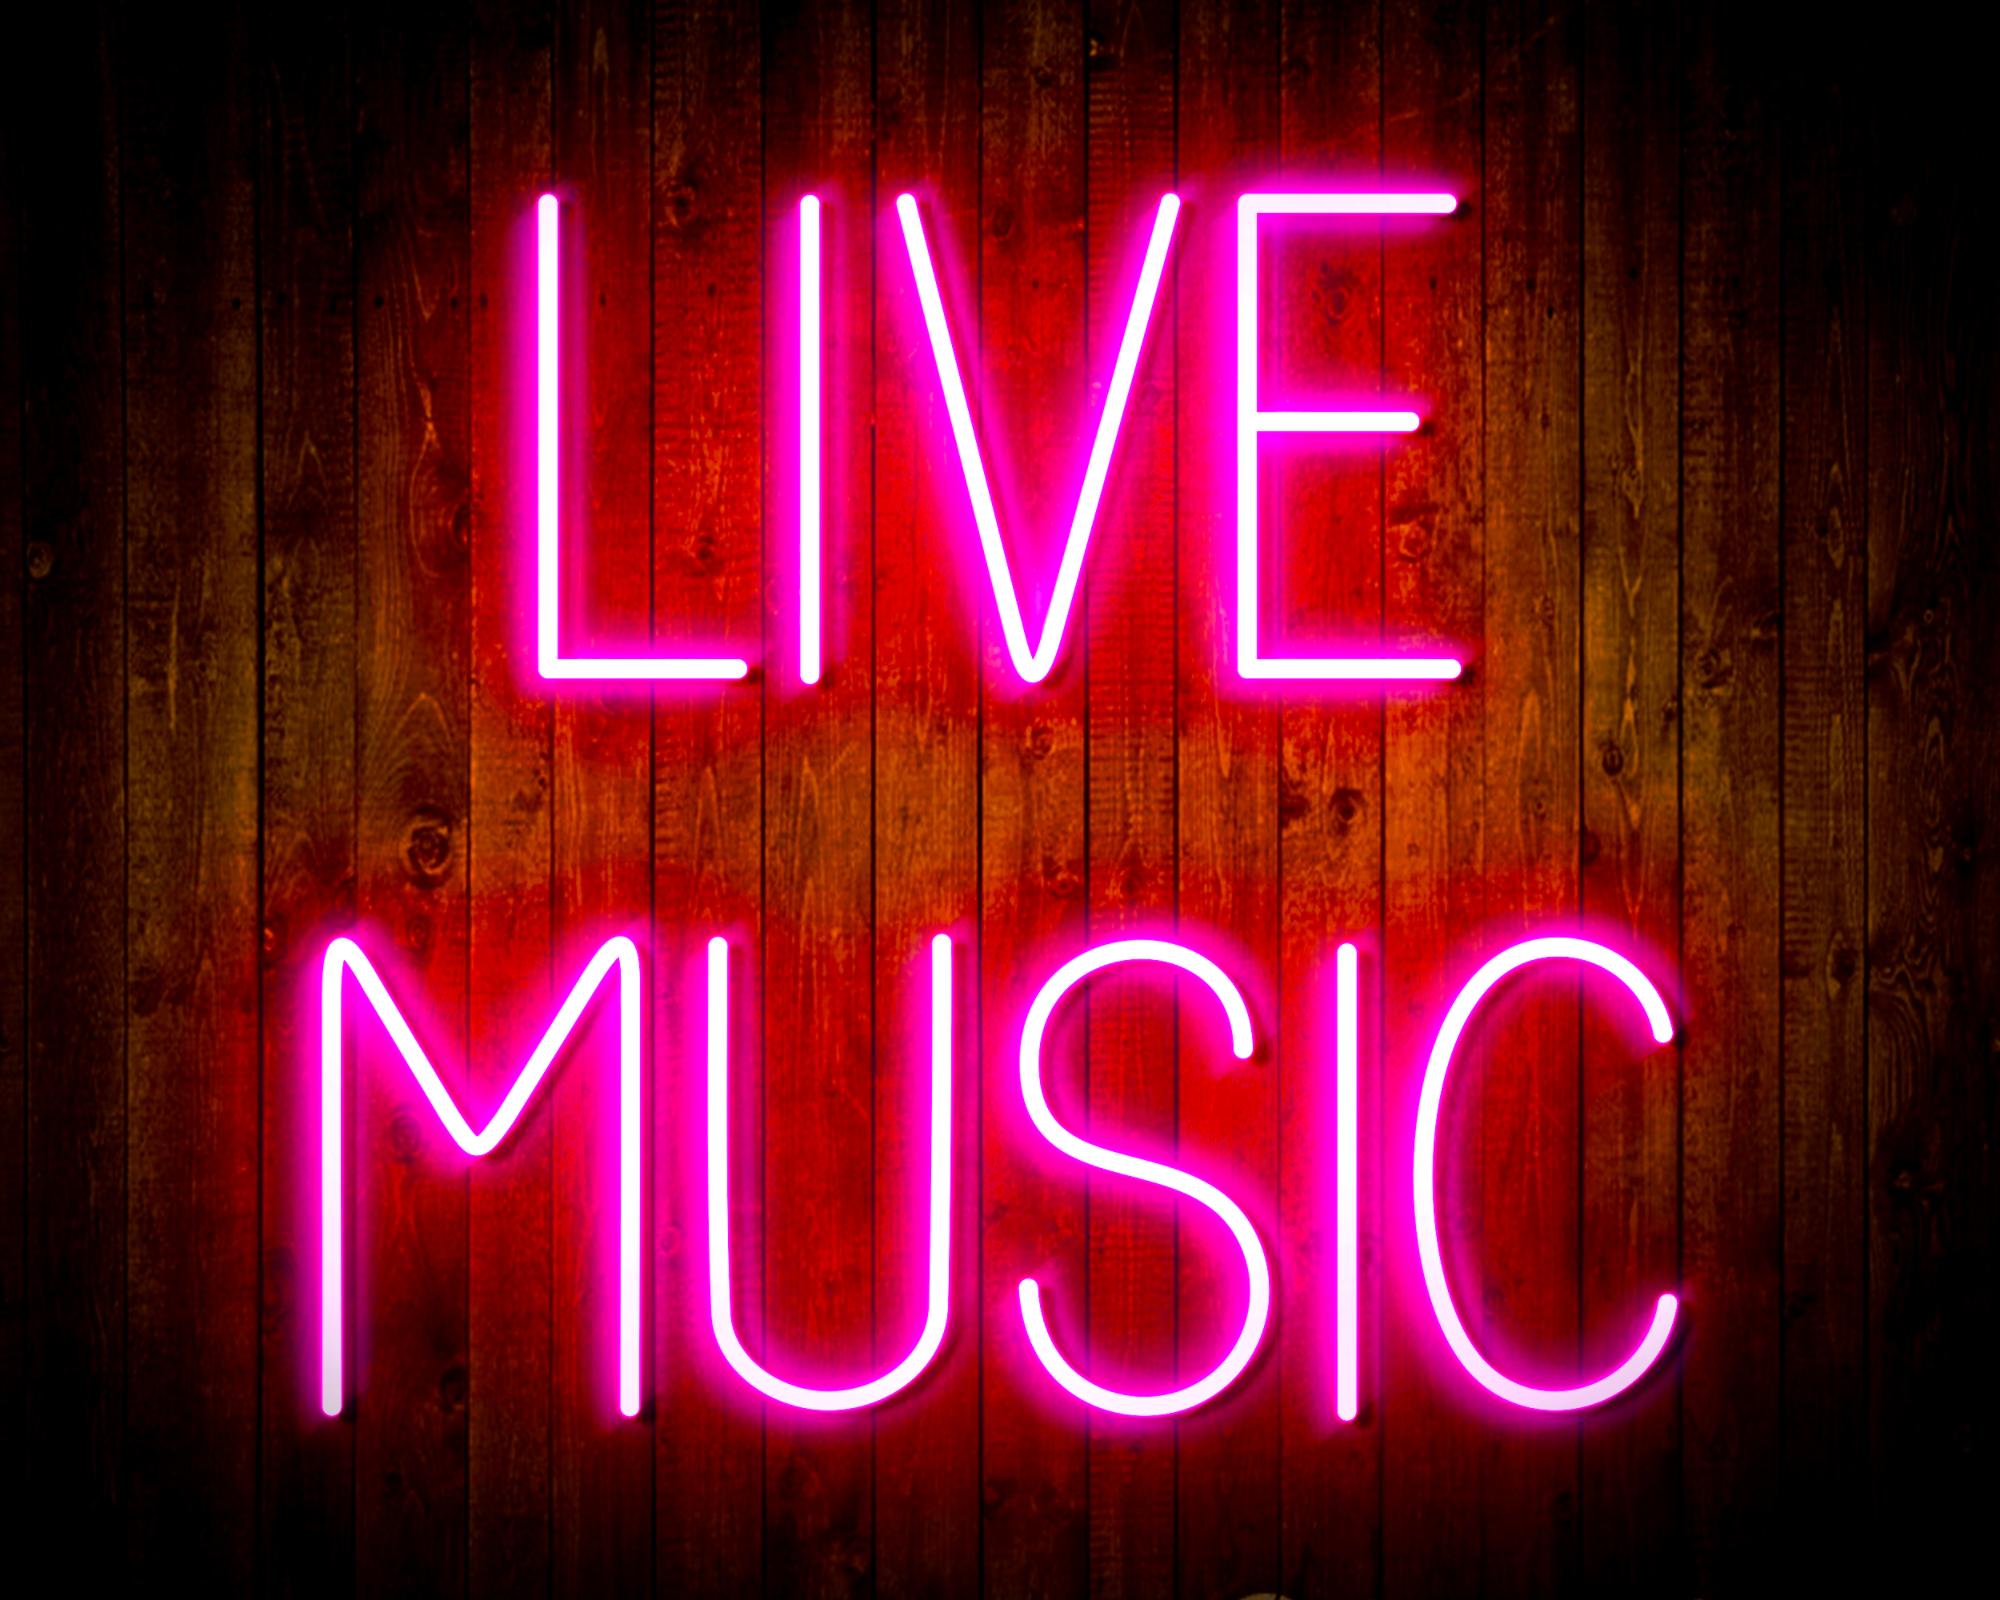 Live Music LED Neon Sign Wall Light